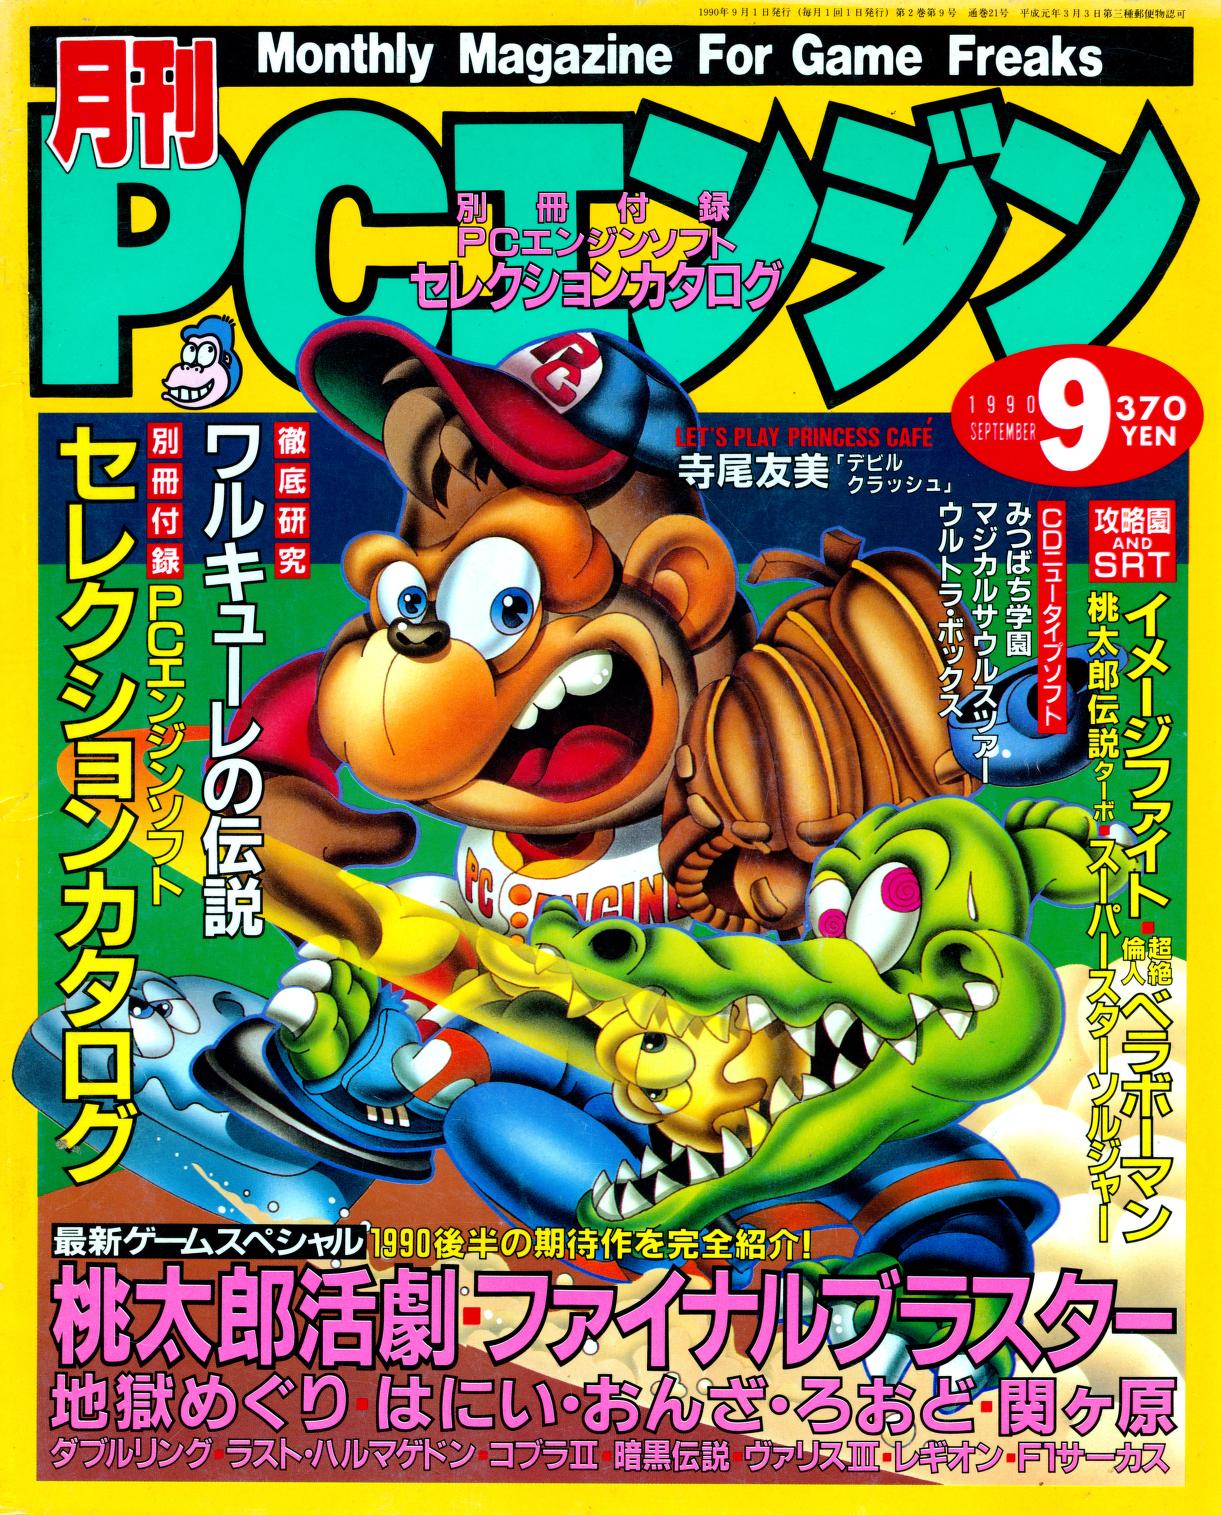 Gekkan PC Engine - Issue 24 September 1990 (600DPI) : Shogakukan : Free  Download, Borrow, and Streaming : Internet Archive